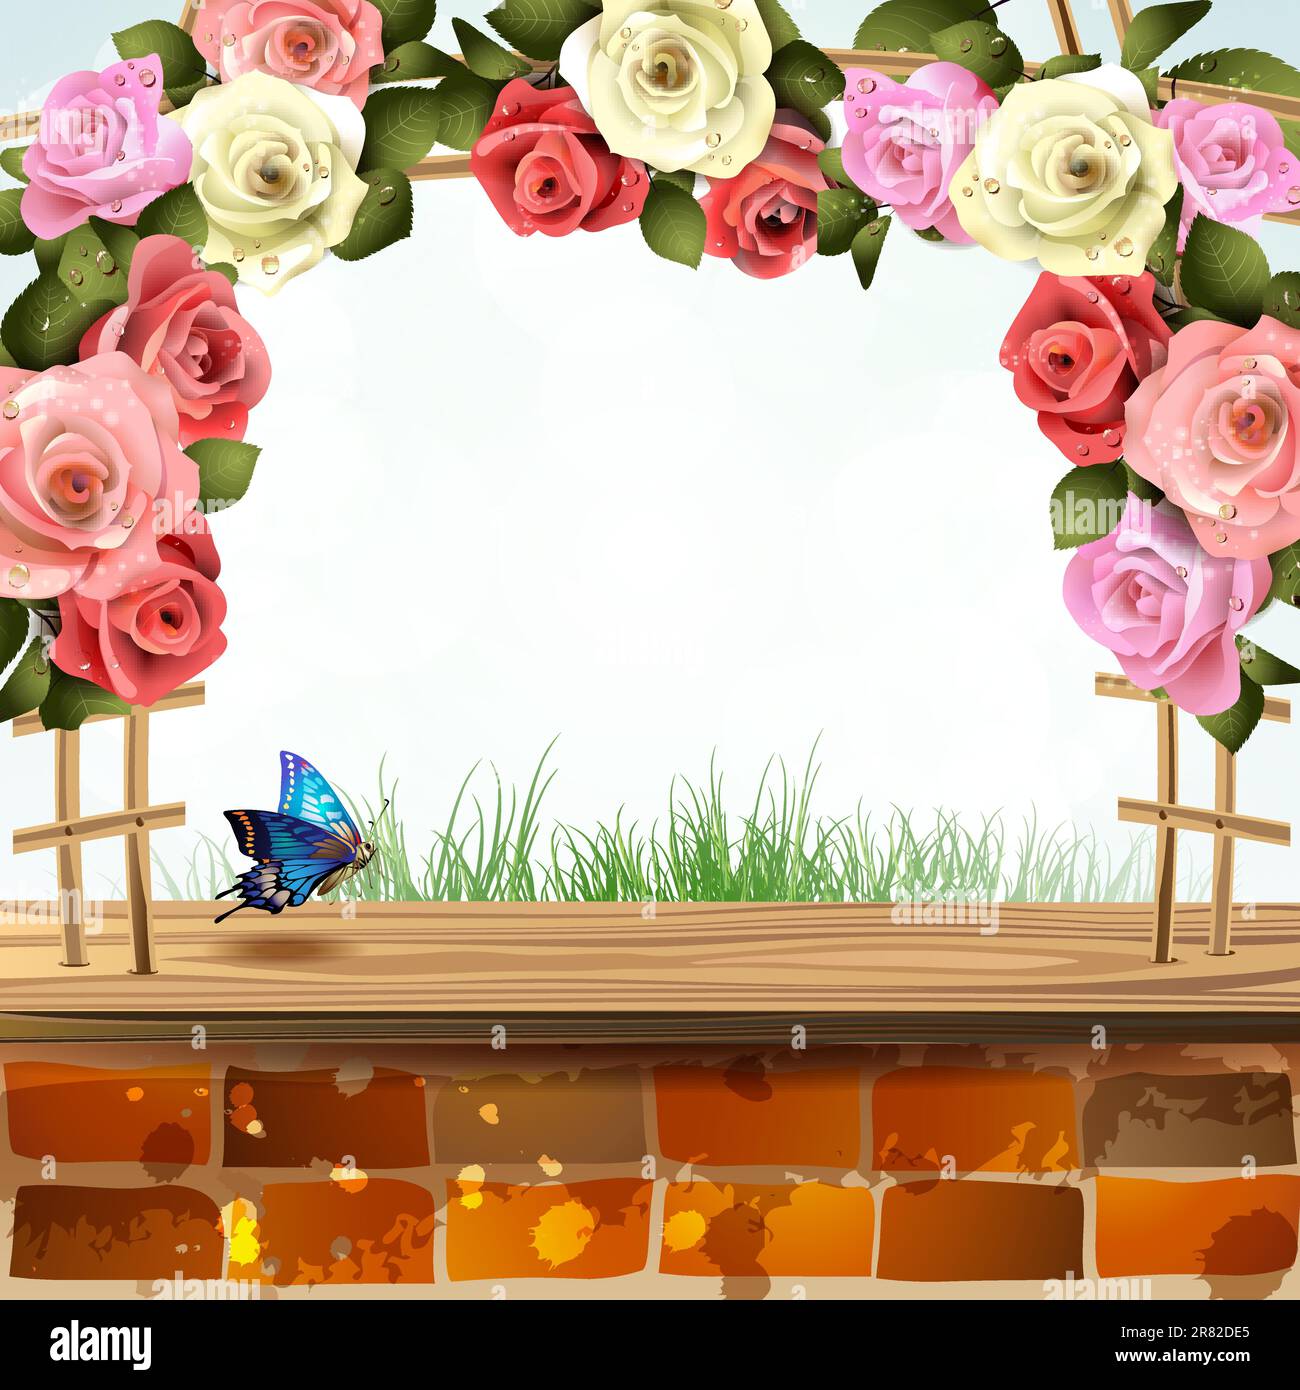 Brick wall with frame of roses Stock Vector